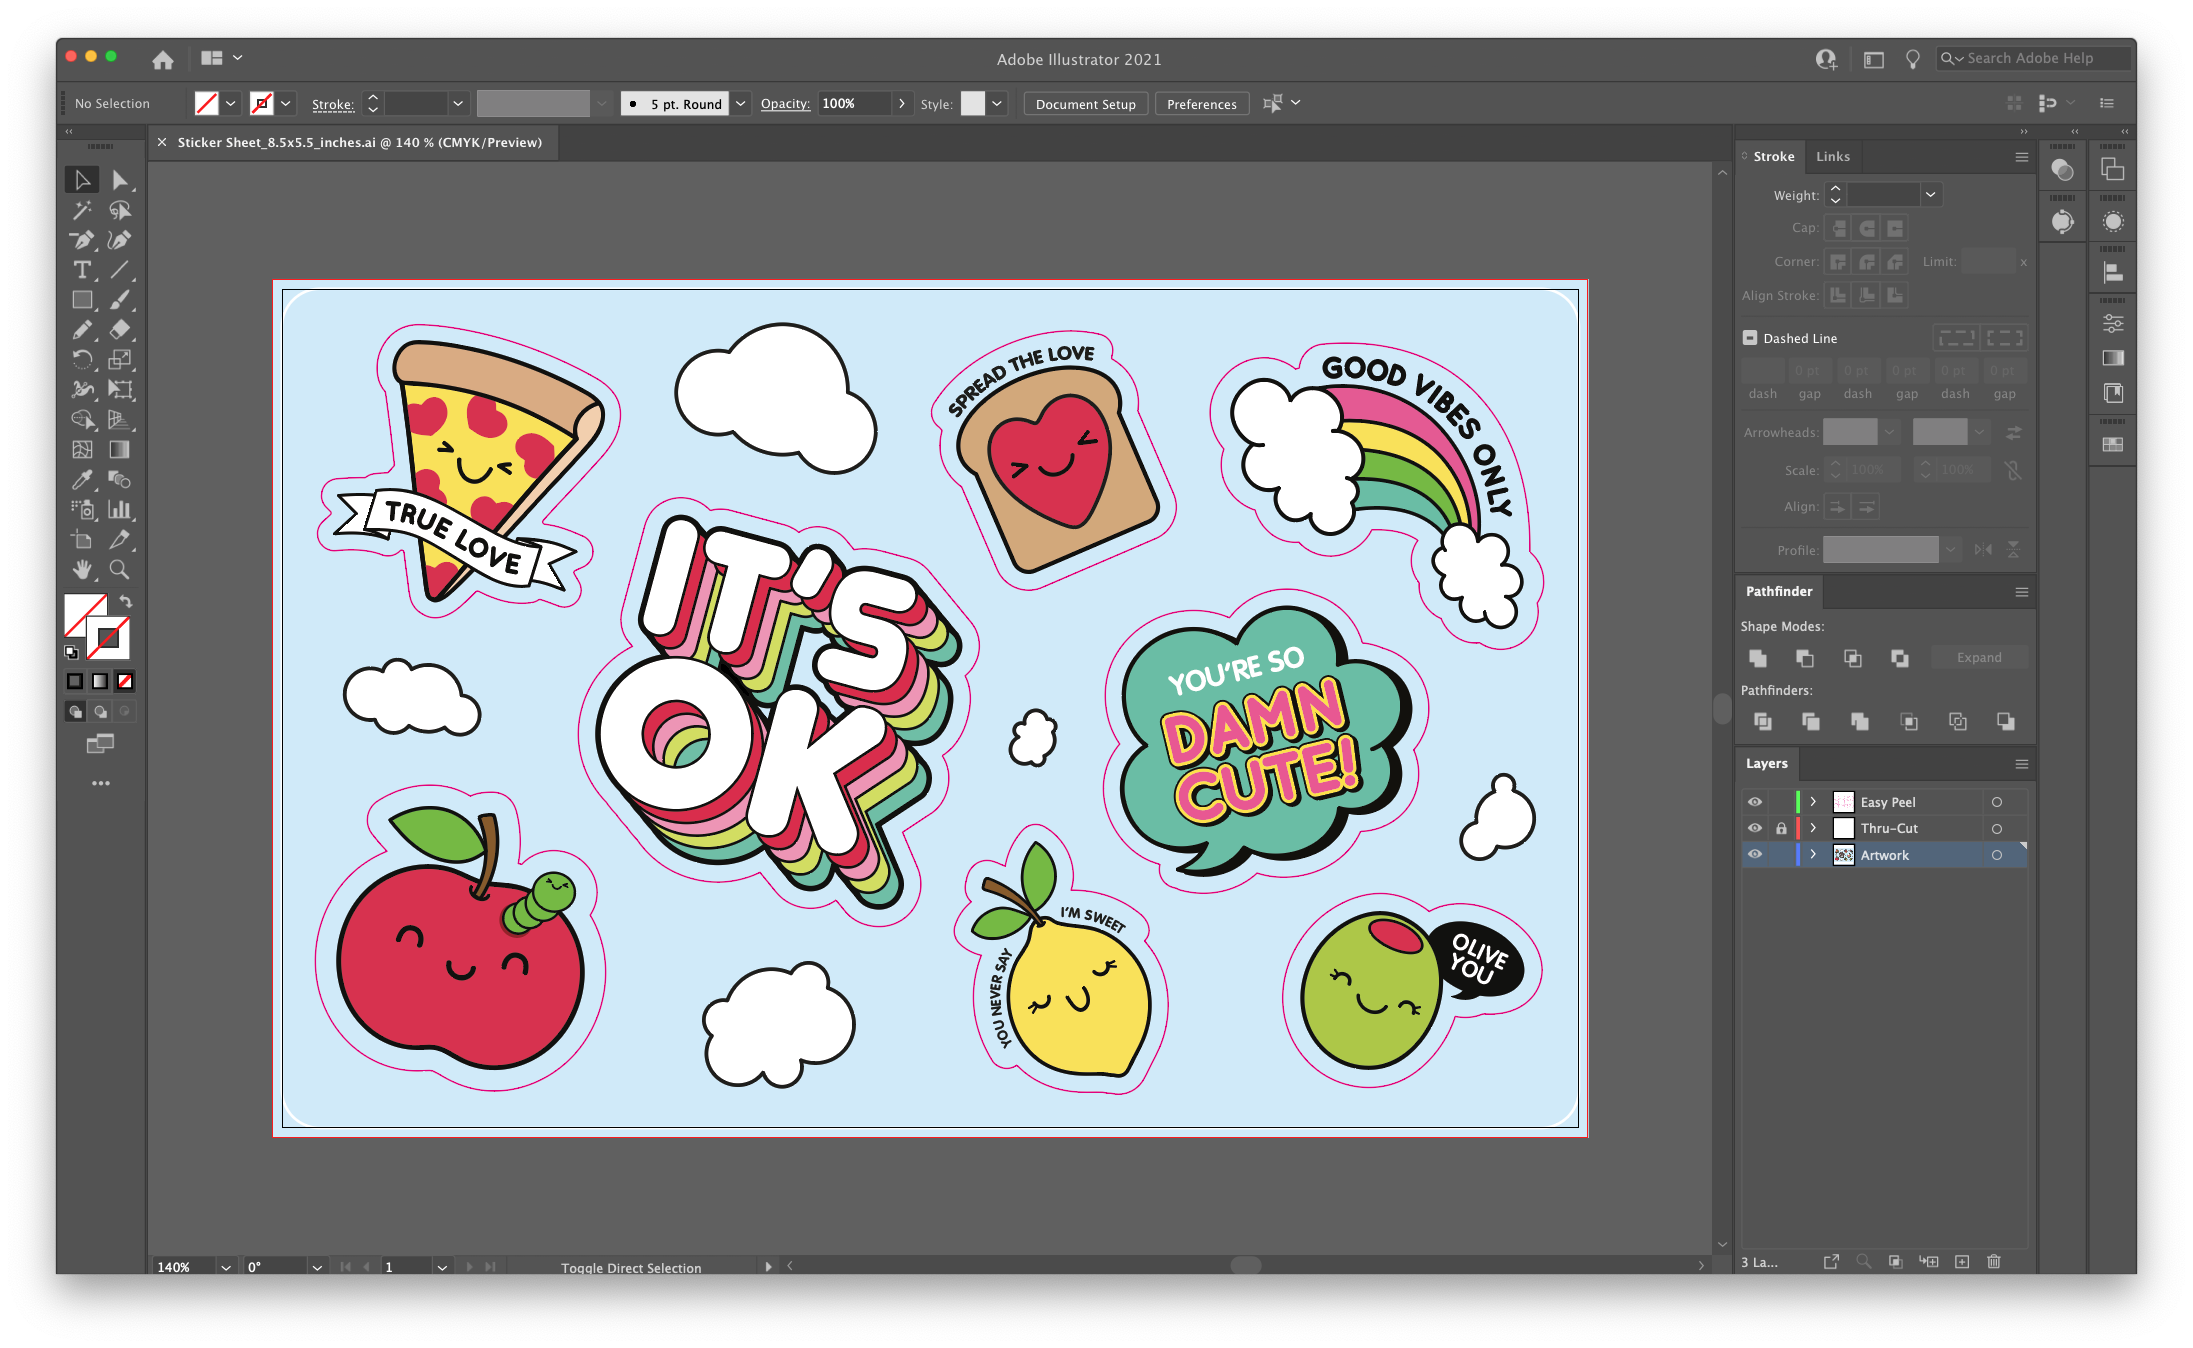 A Step-By-Step Guide To Making Sticker Sheets In Adobe Illustrator